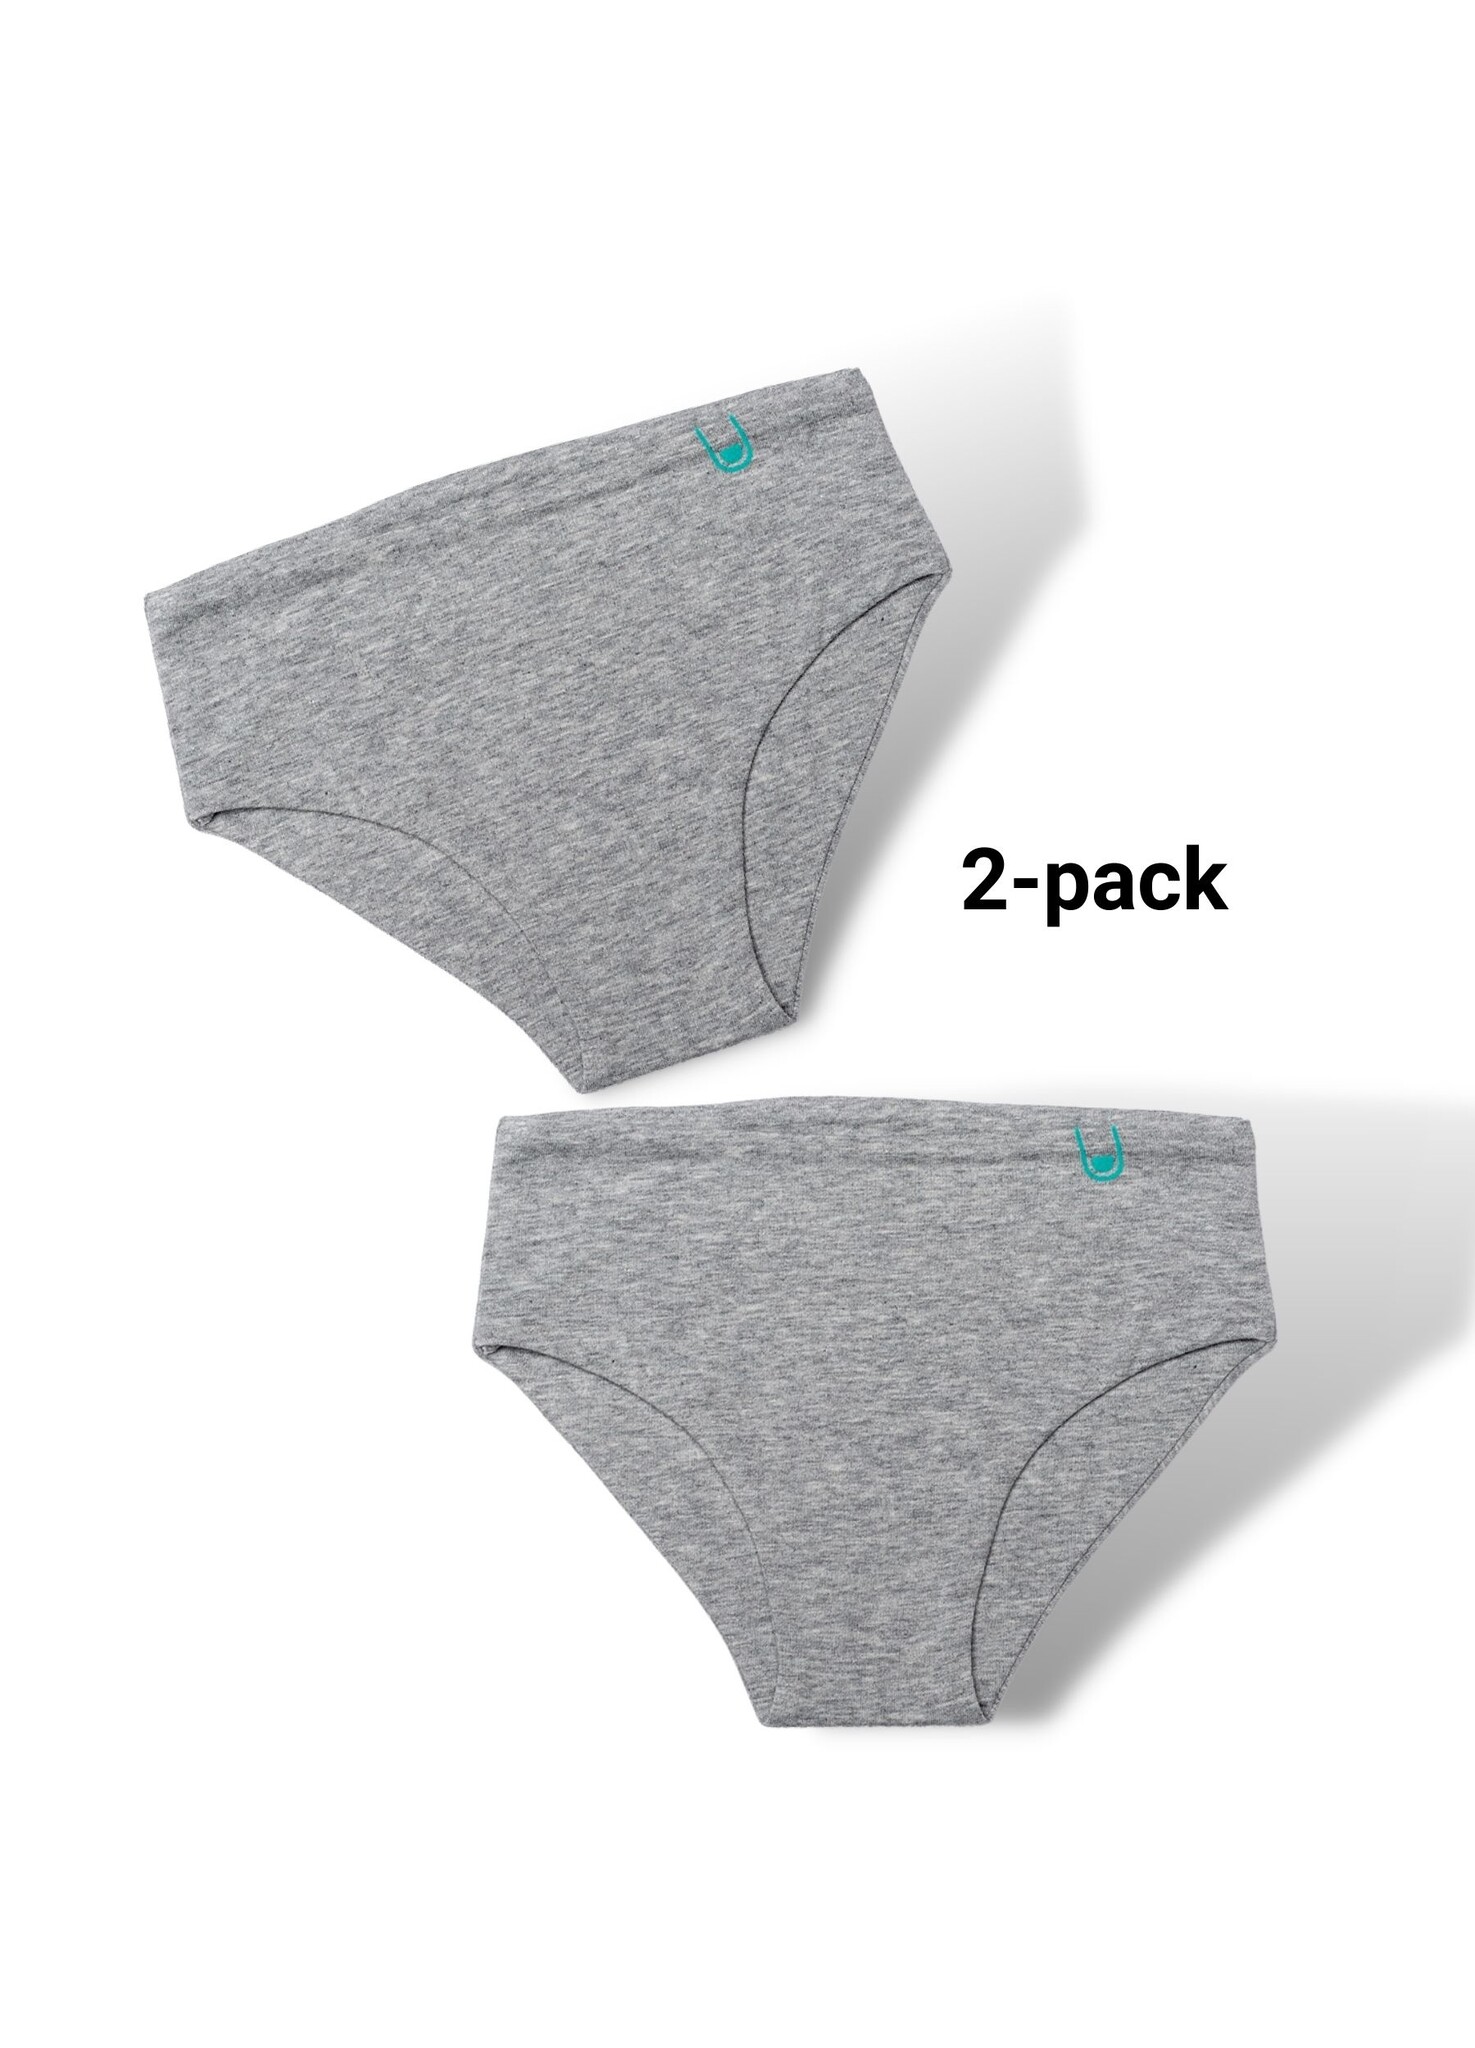 Soft girls briefs. Seamless, no itchy labels. From organic Cotton